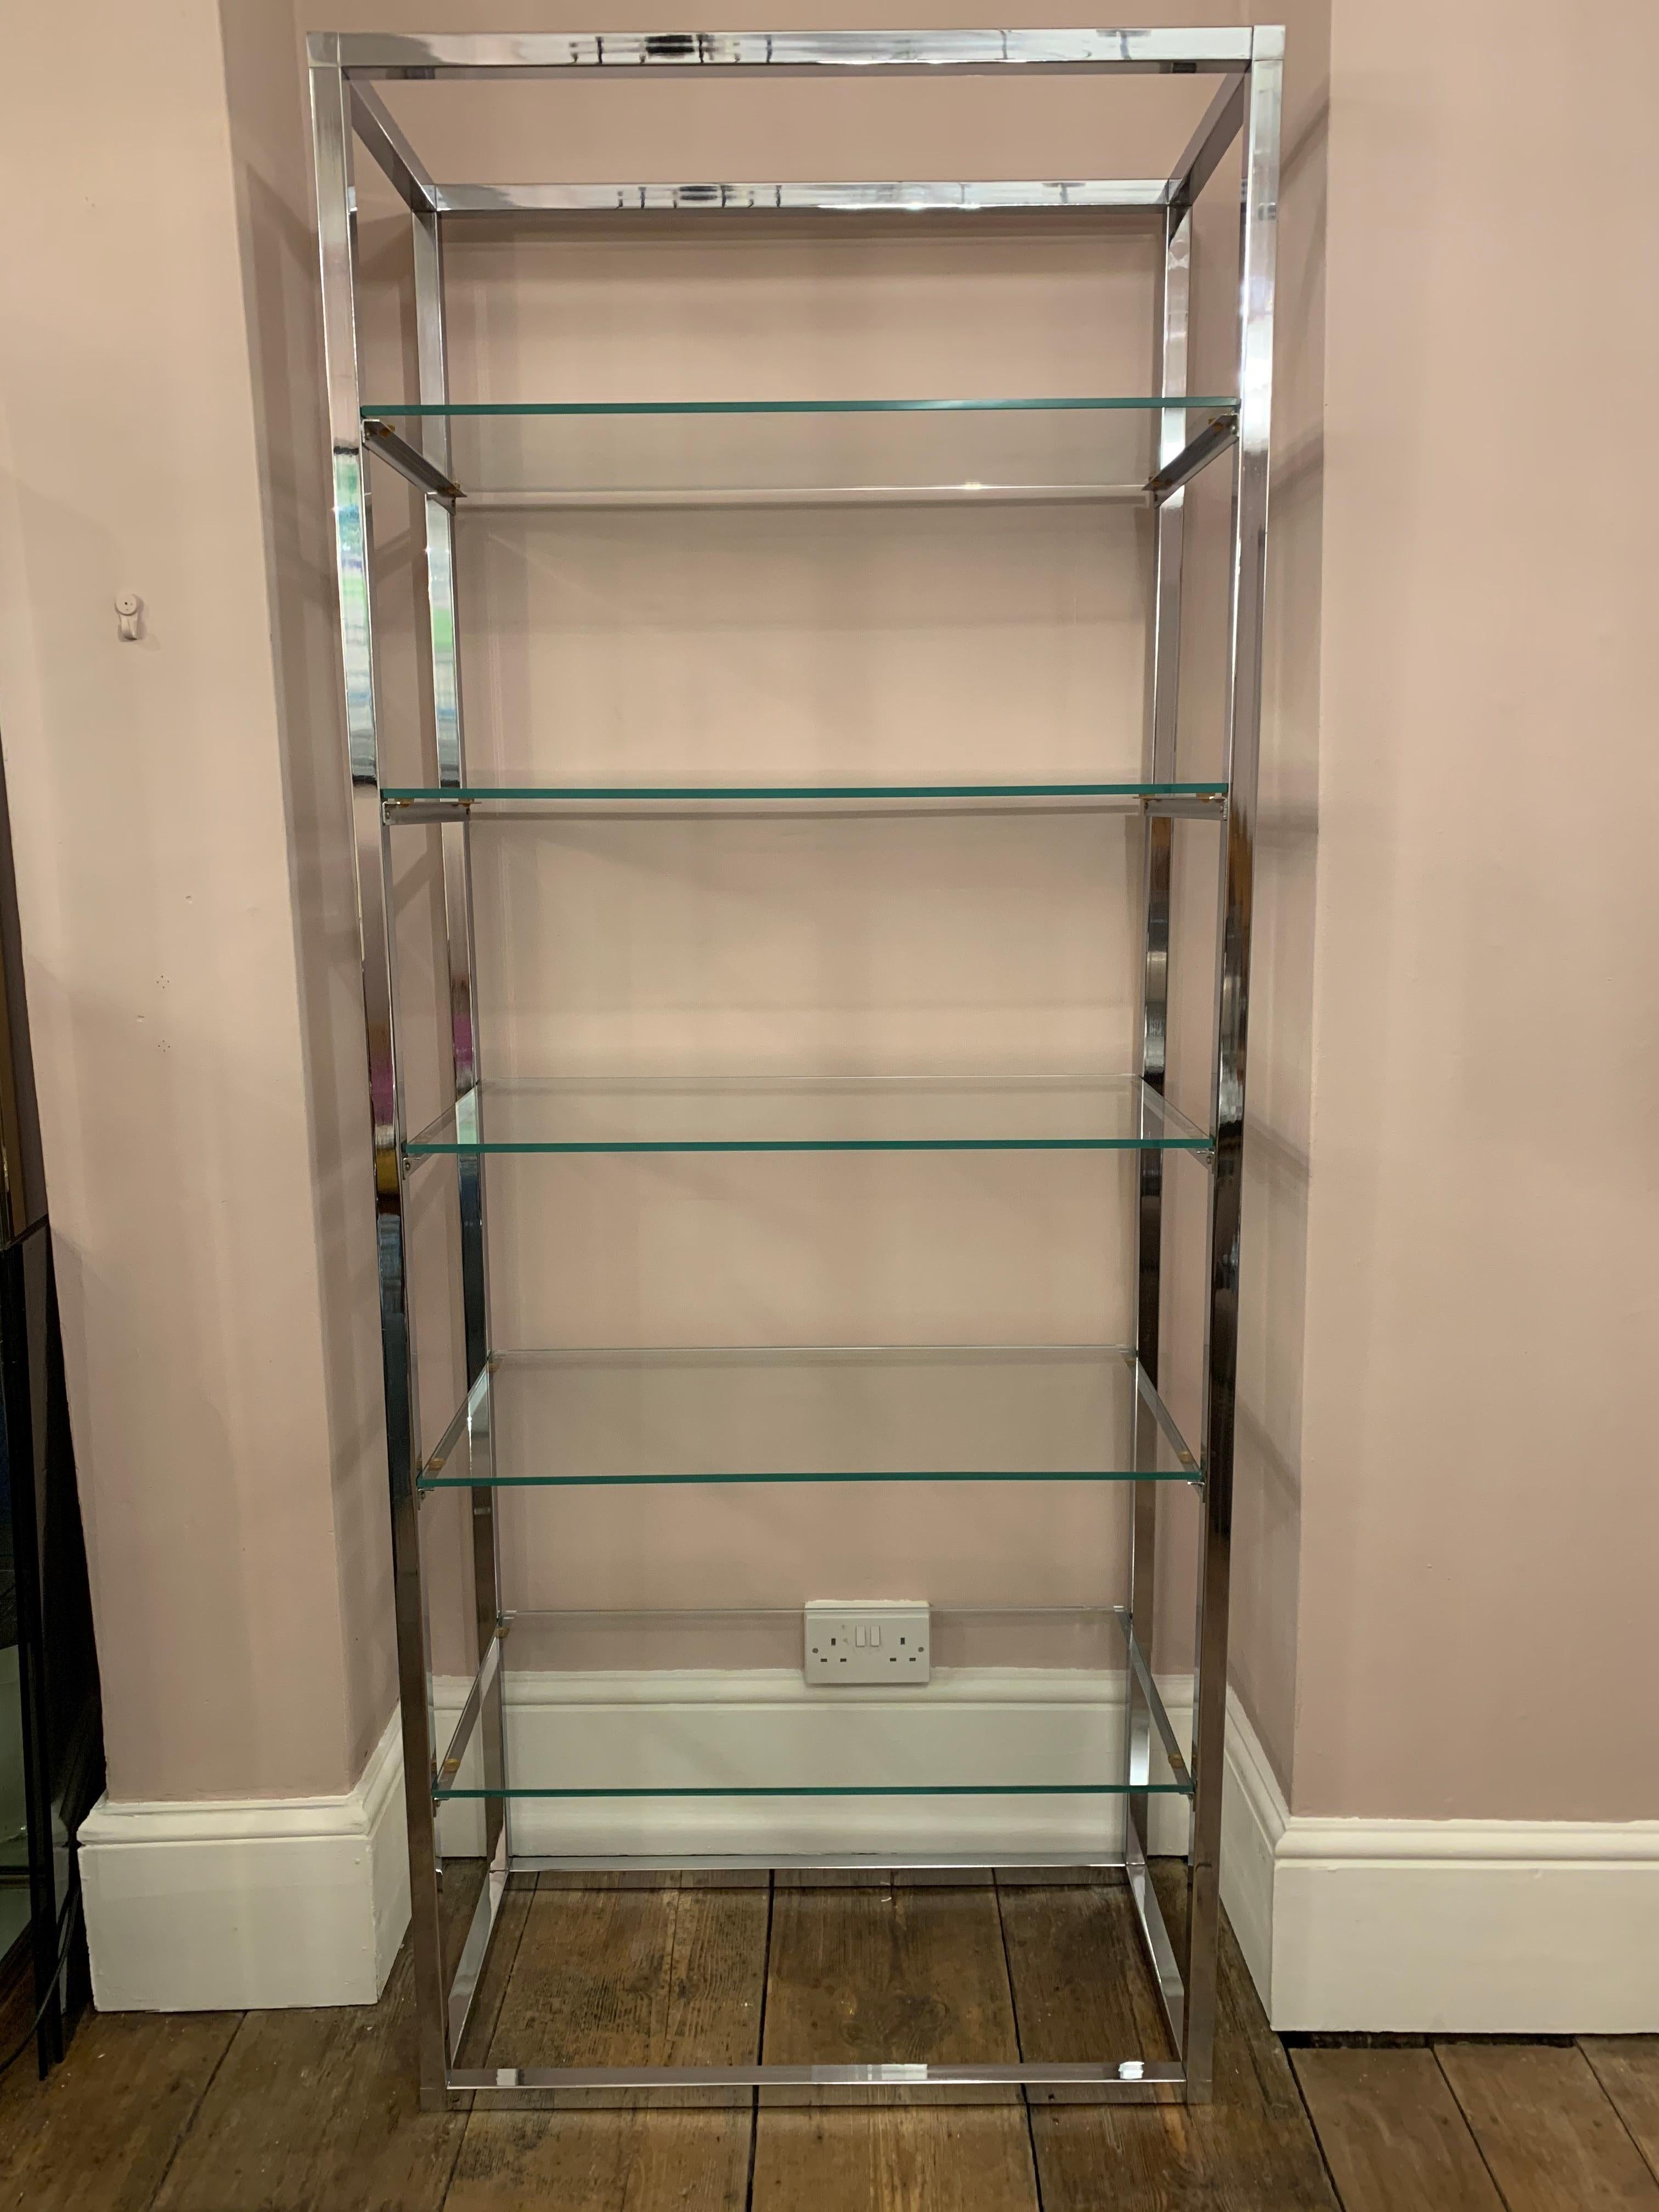 1970s Belgium vintage polished chrome and thick clear glass étagère or shelving unit. A simple yet functional design which is perfect for displaying books and your favourite objet. Each of the five shelves supports a thick glass pane of glass which